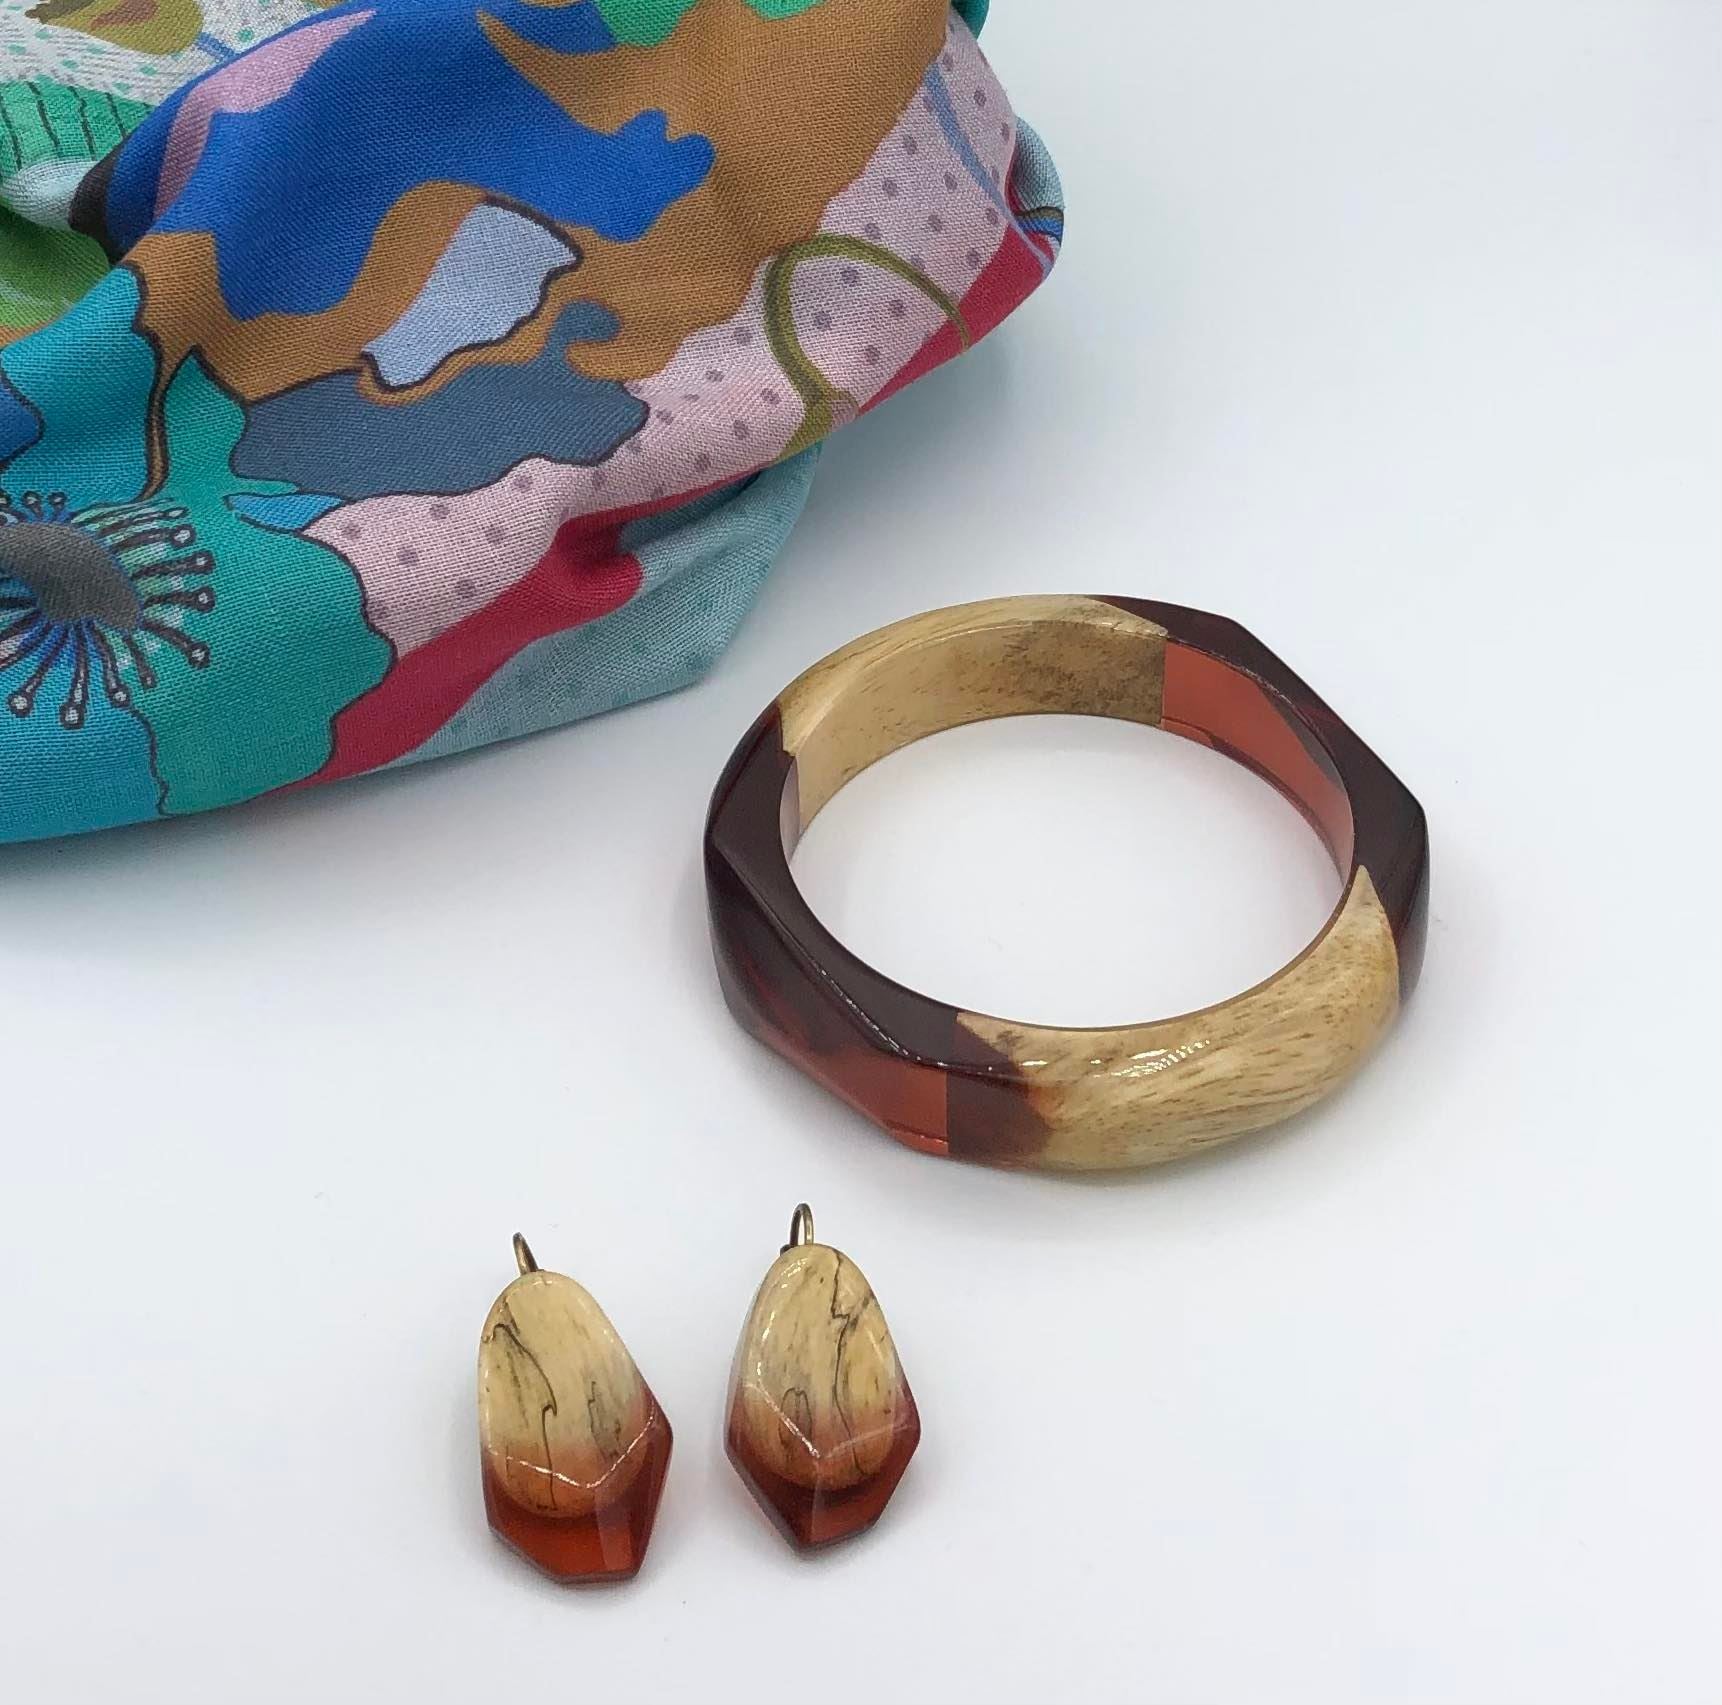 Nature Bijoux Fashion Jewelry Set / Bangle Bracelet And Earrings / Tamarind, Eco Resin / Red, Beige / Sweet Amber